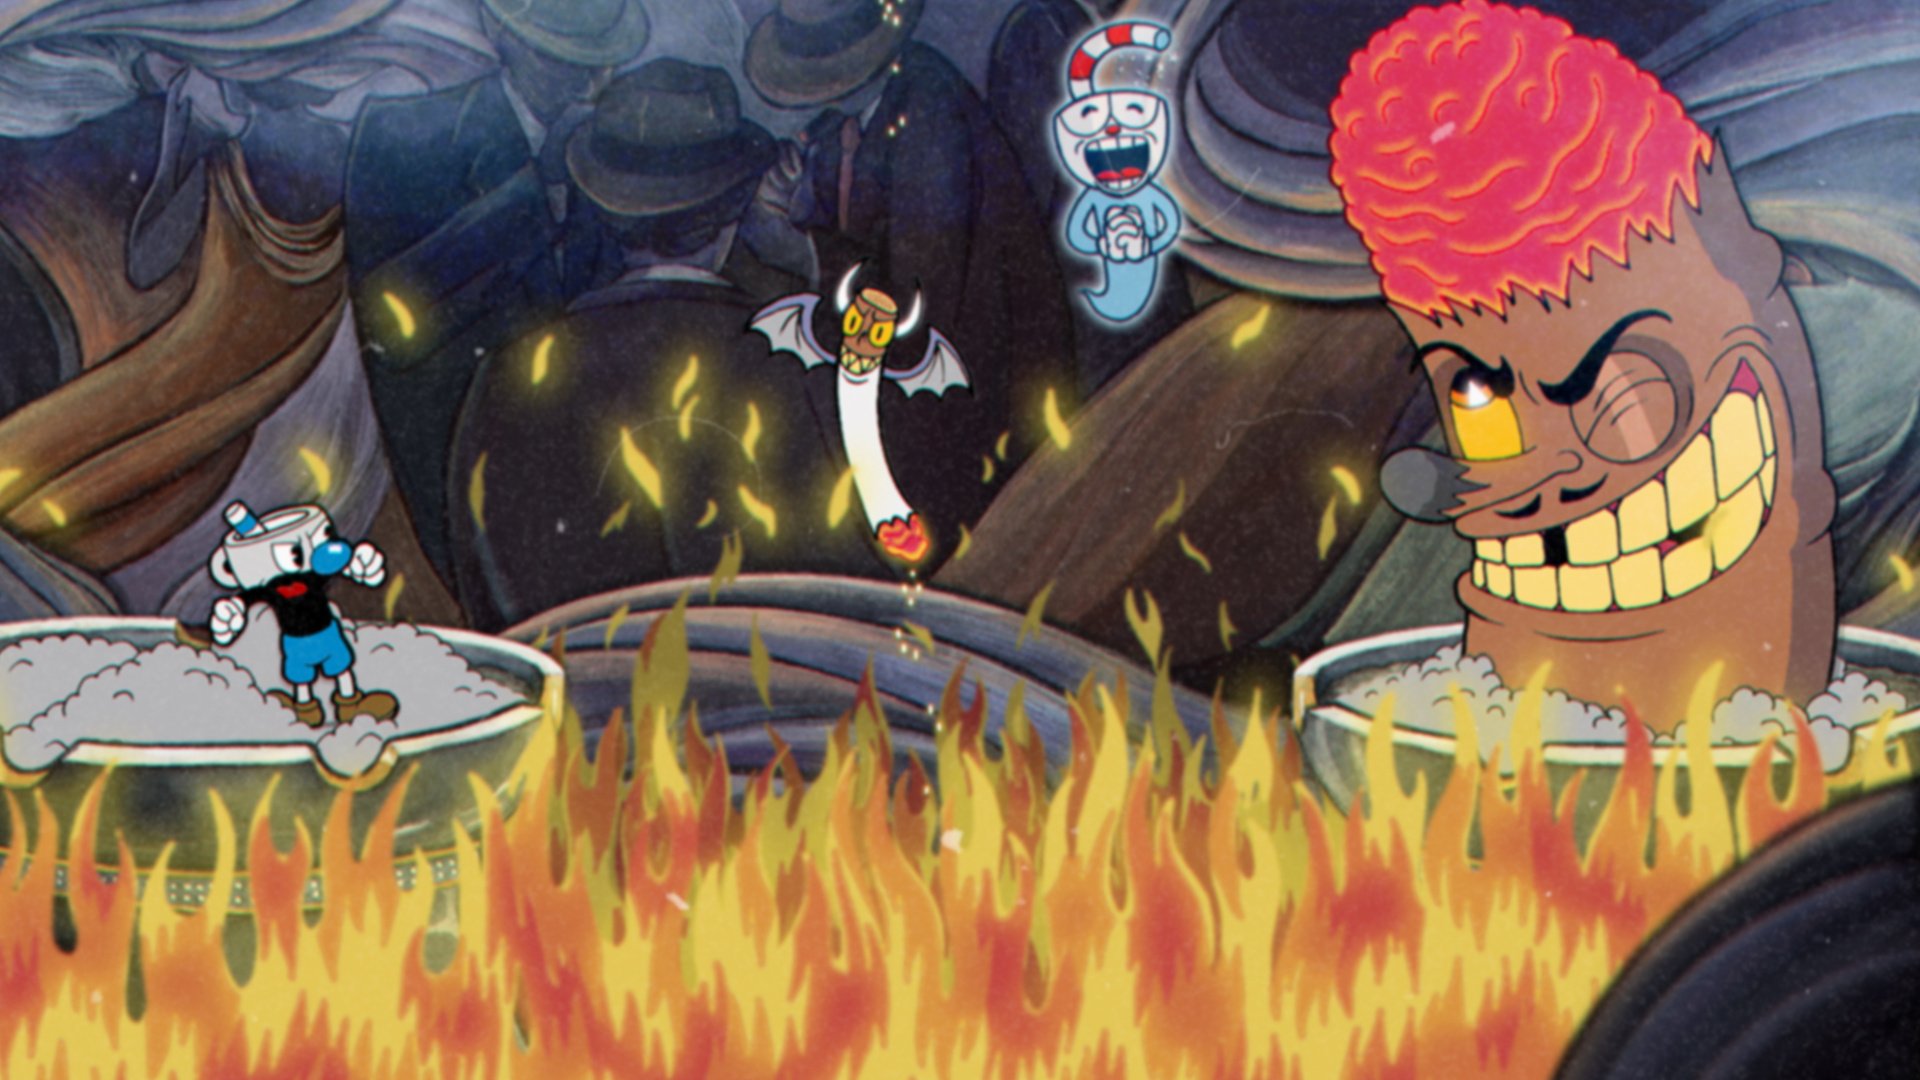 is cuphead online multiplayer ps4